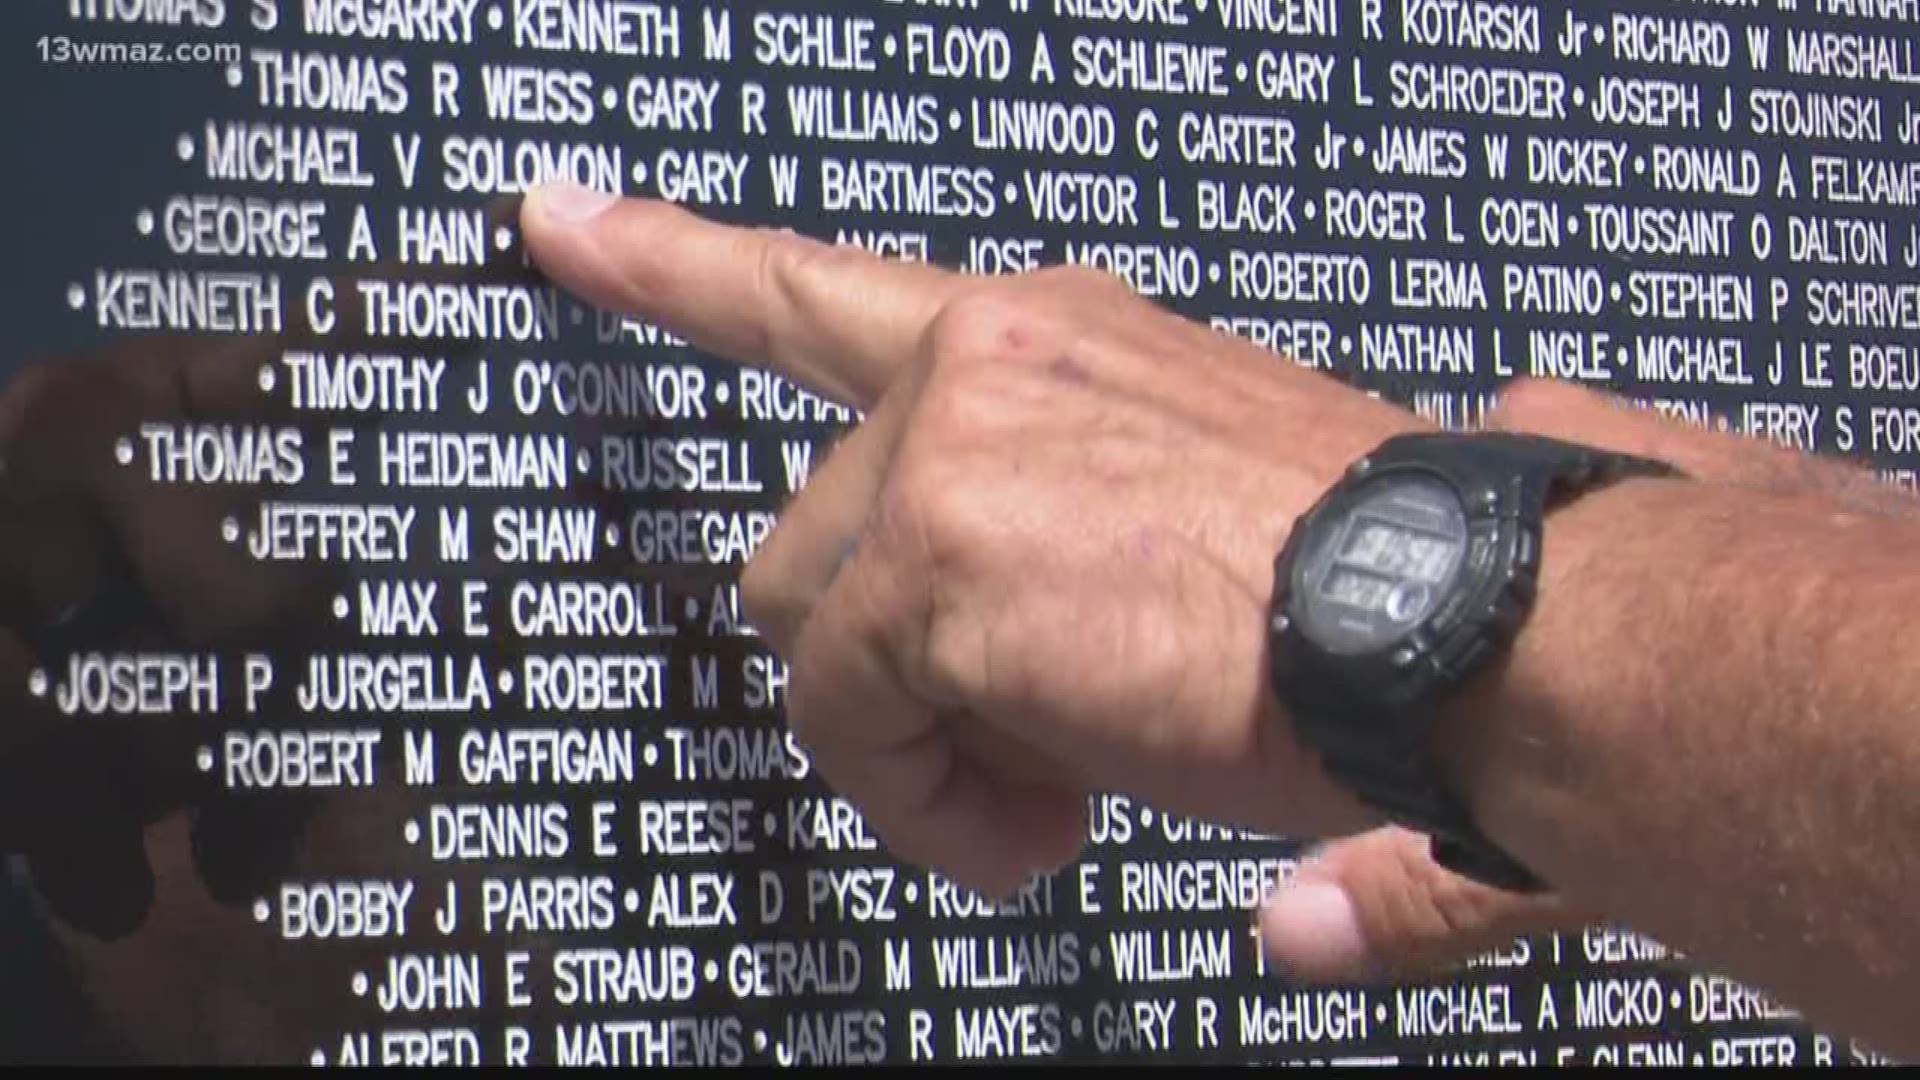 The replica of the wall in Washington D.C. travels around the U.S., paying tribute to those who died in the Vietnam War.